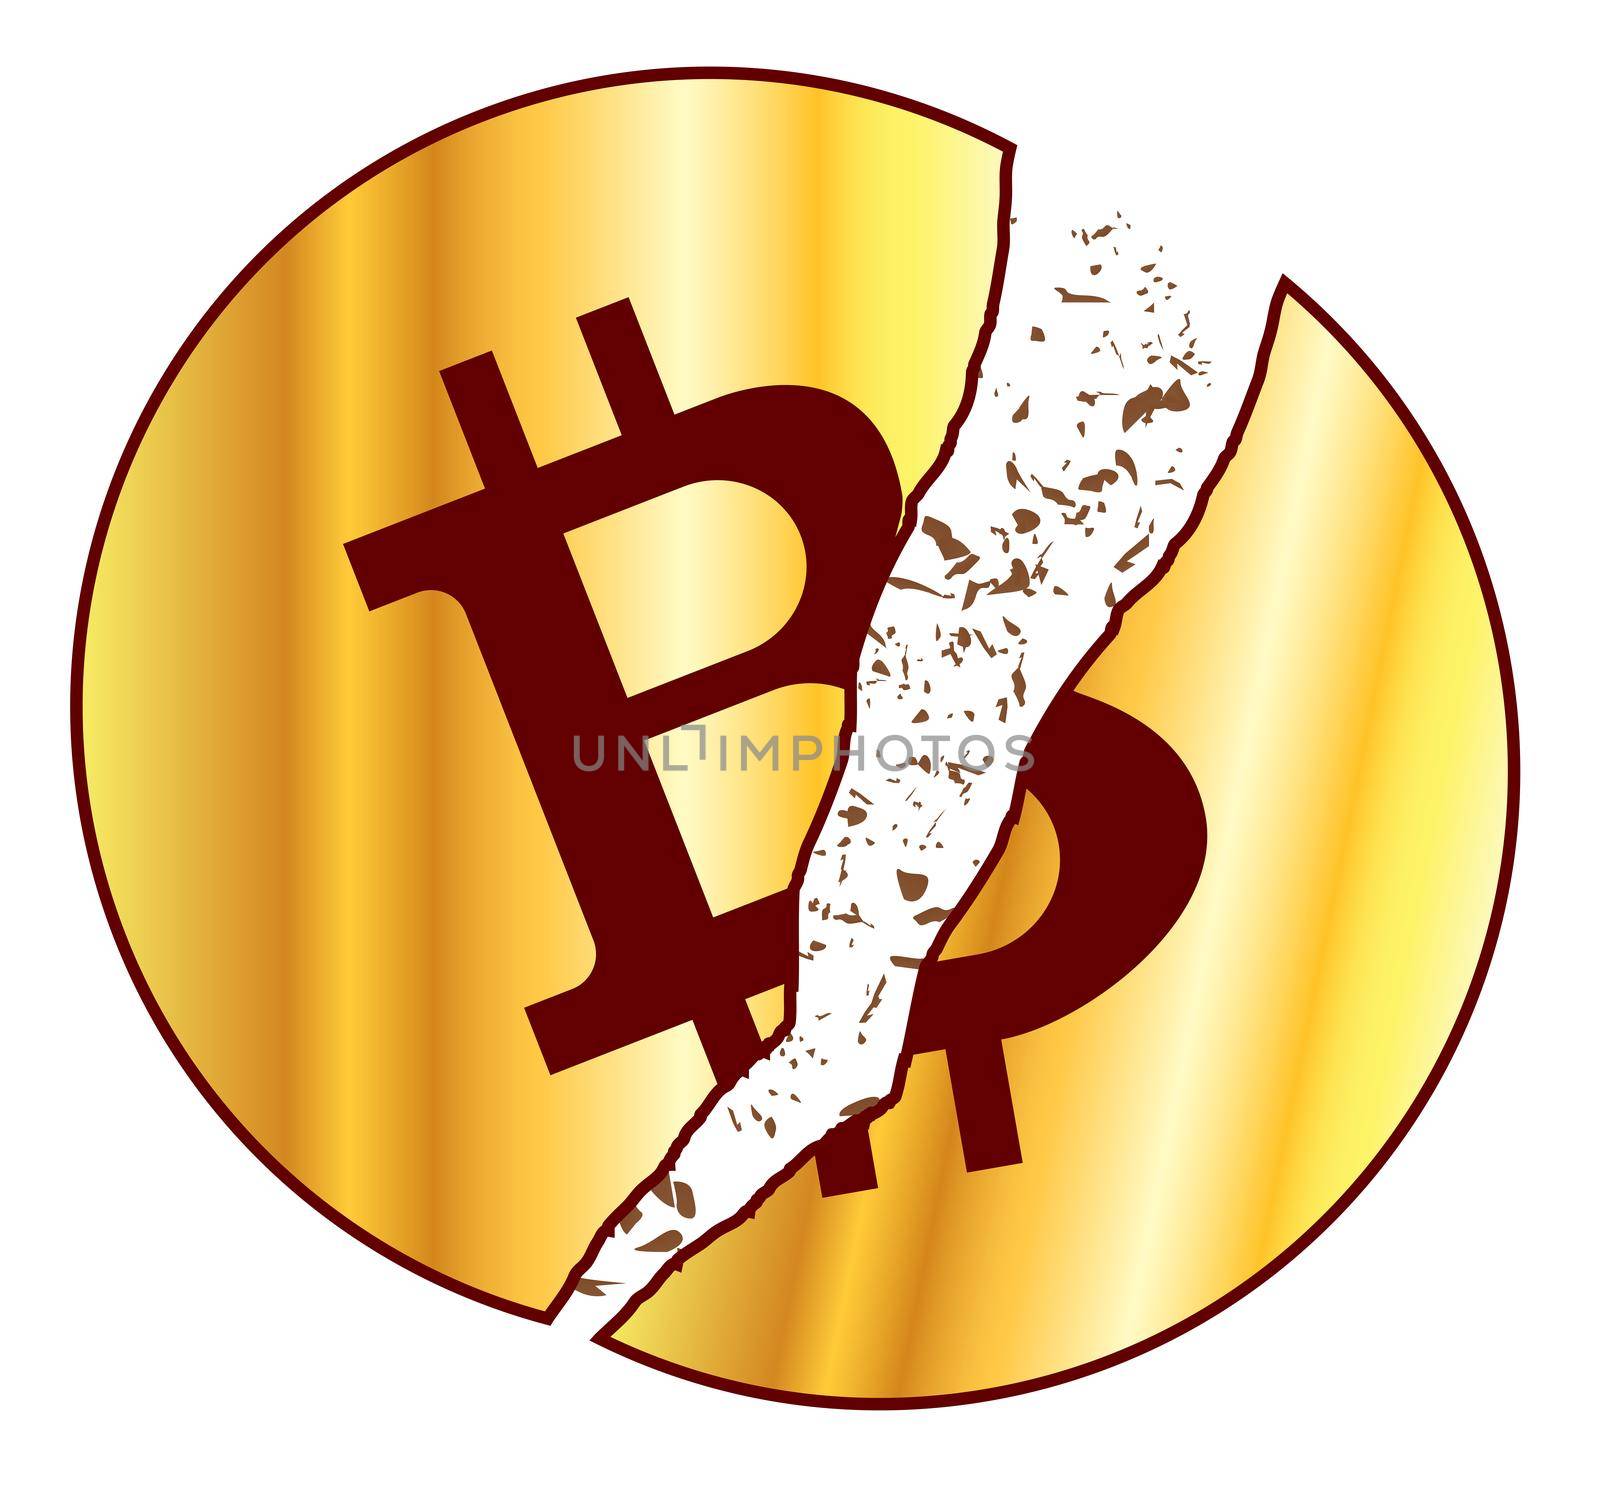 Golden bitcoin with symbol over a white background with broken pieces